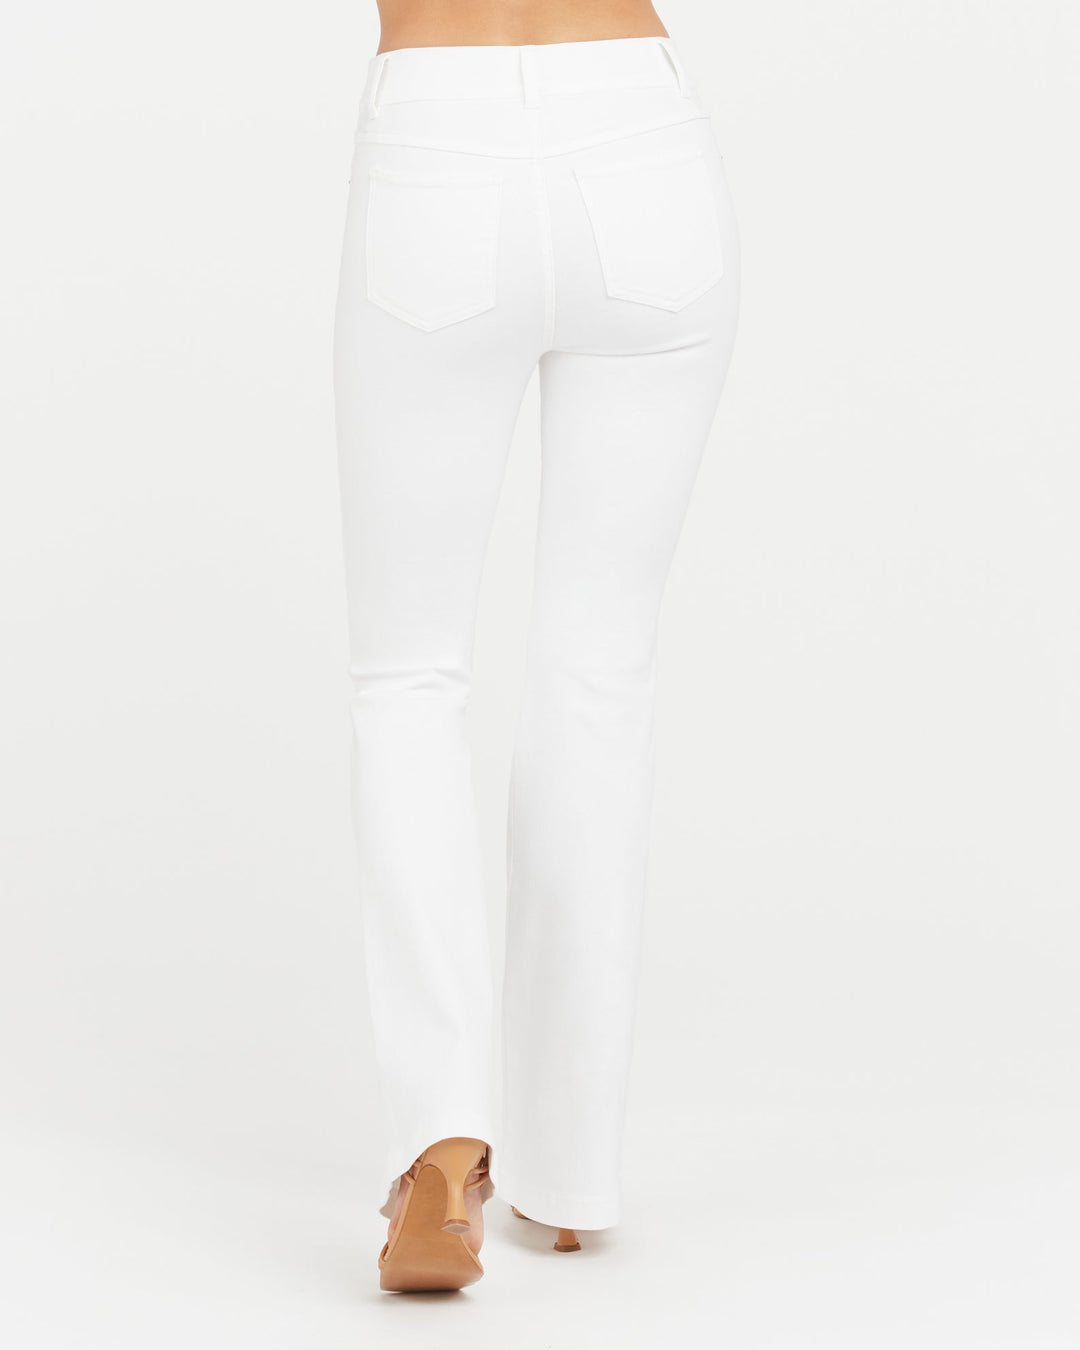 FLARE JEANS- WHITE